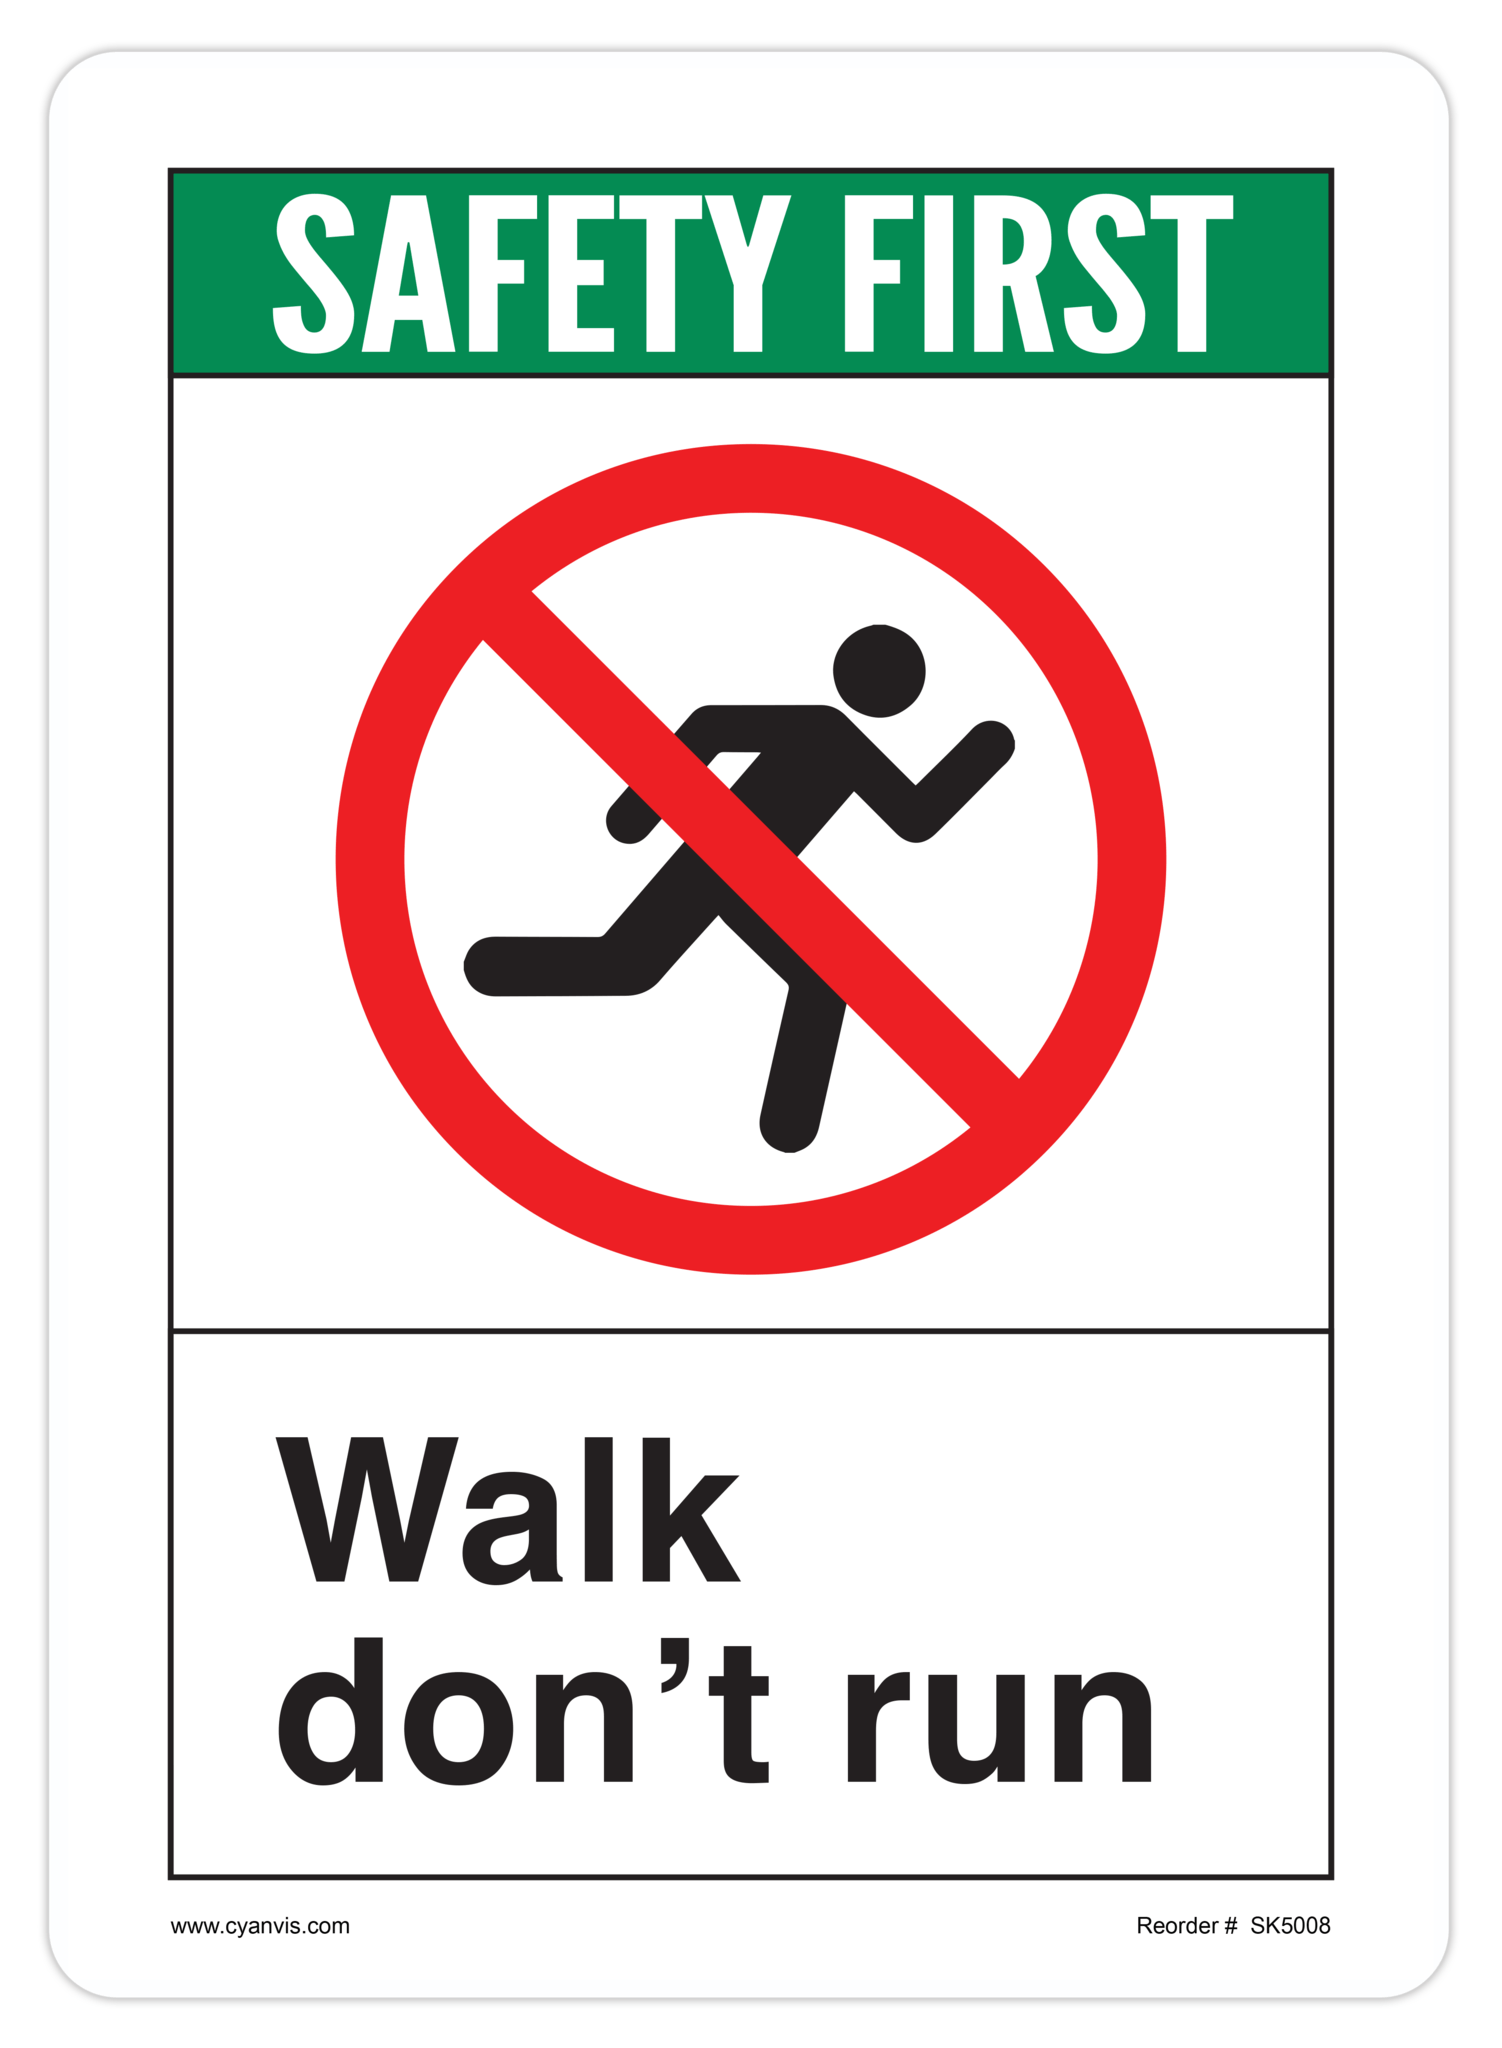 High quality ANSI - Safety First safety sign